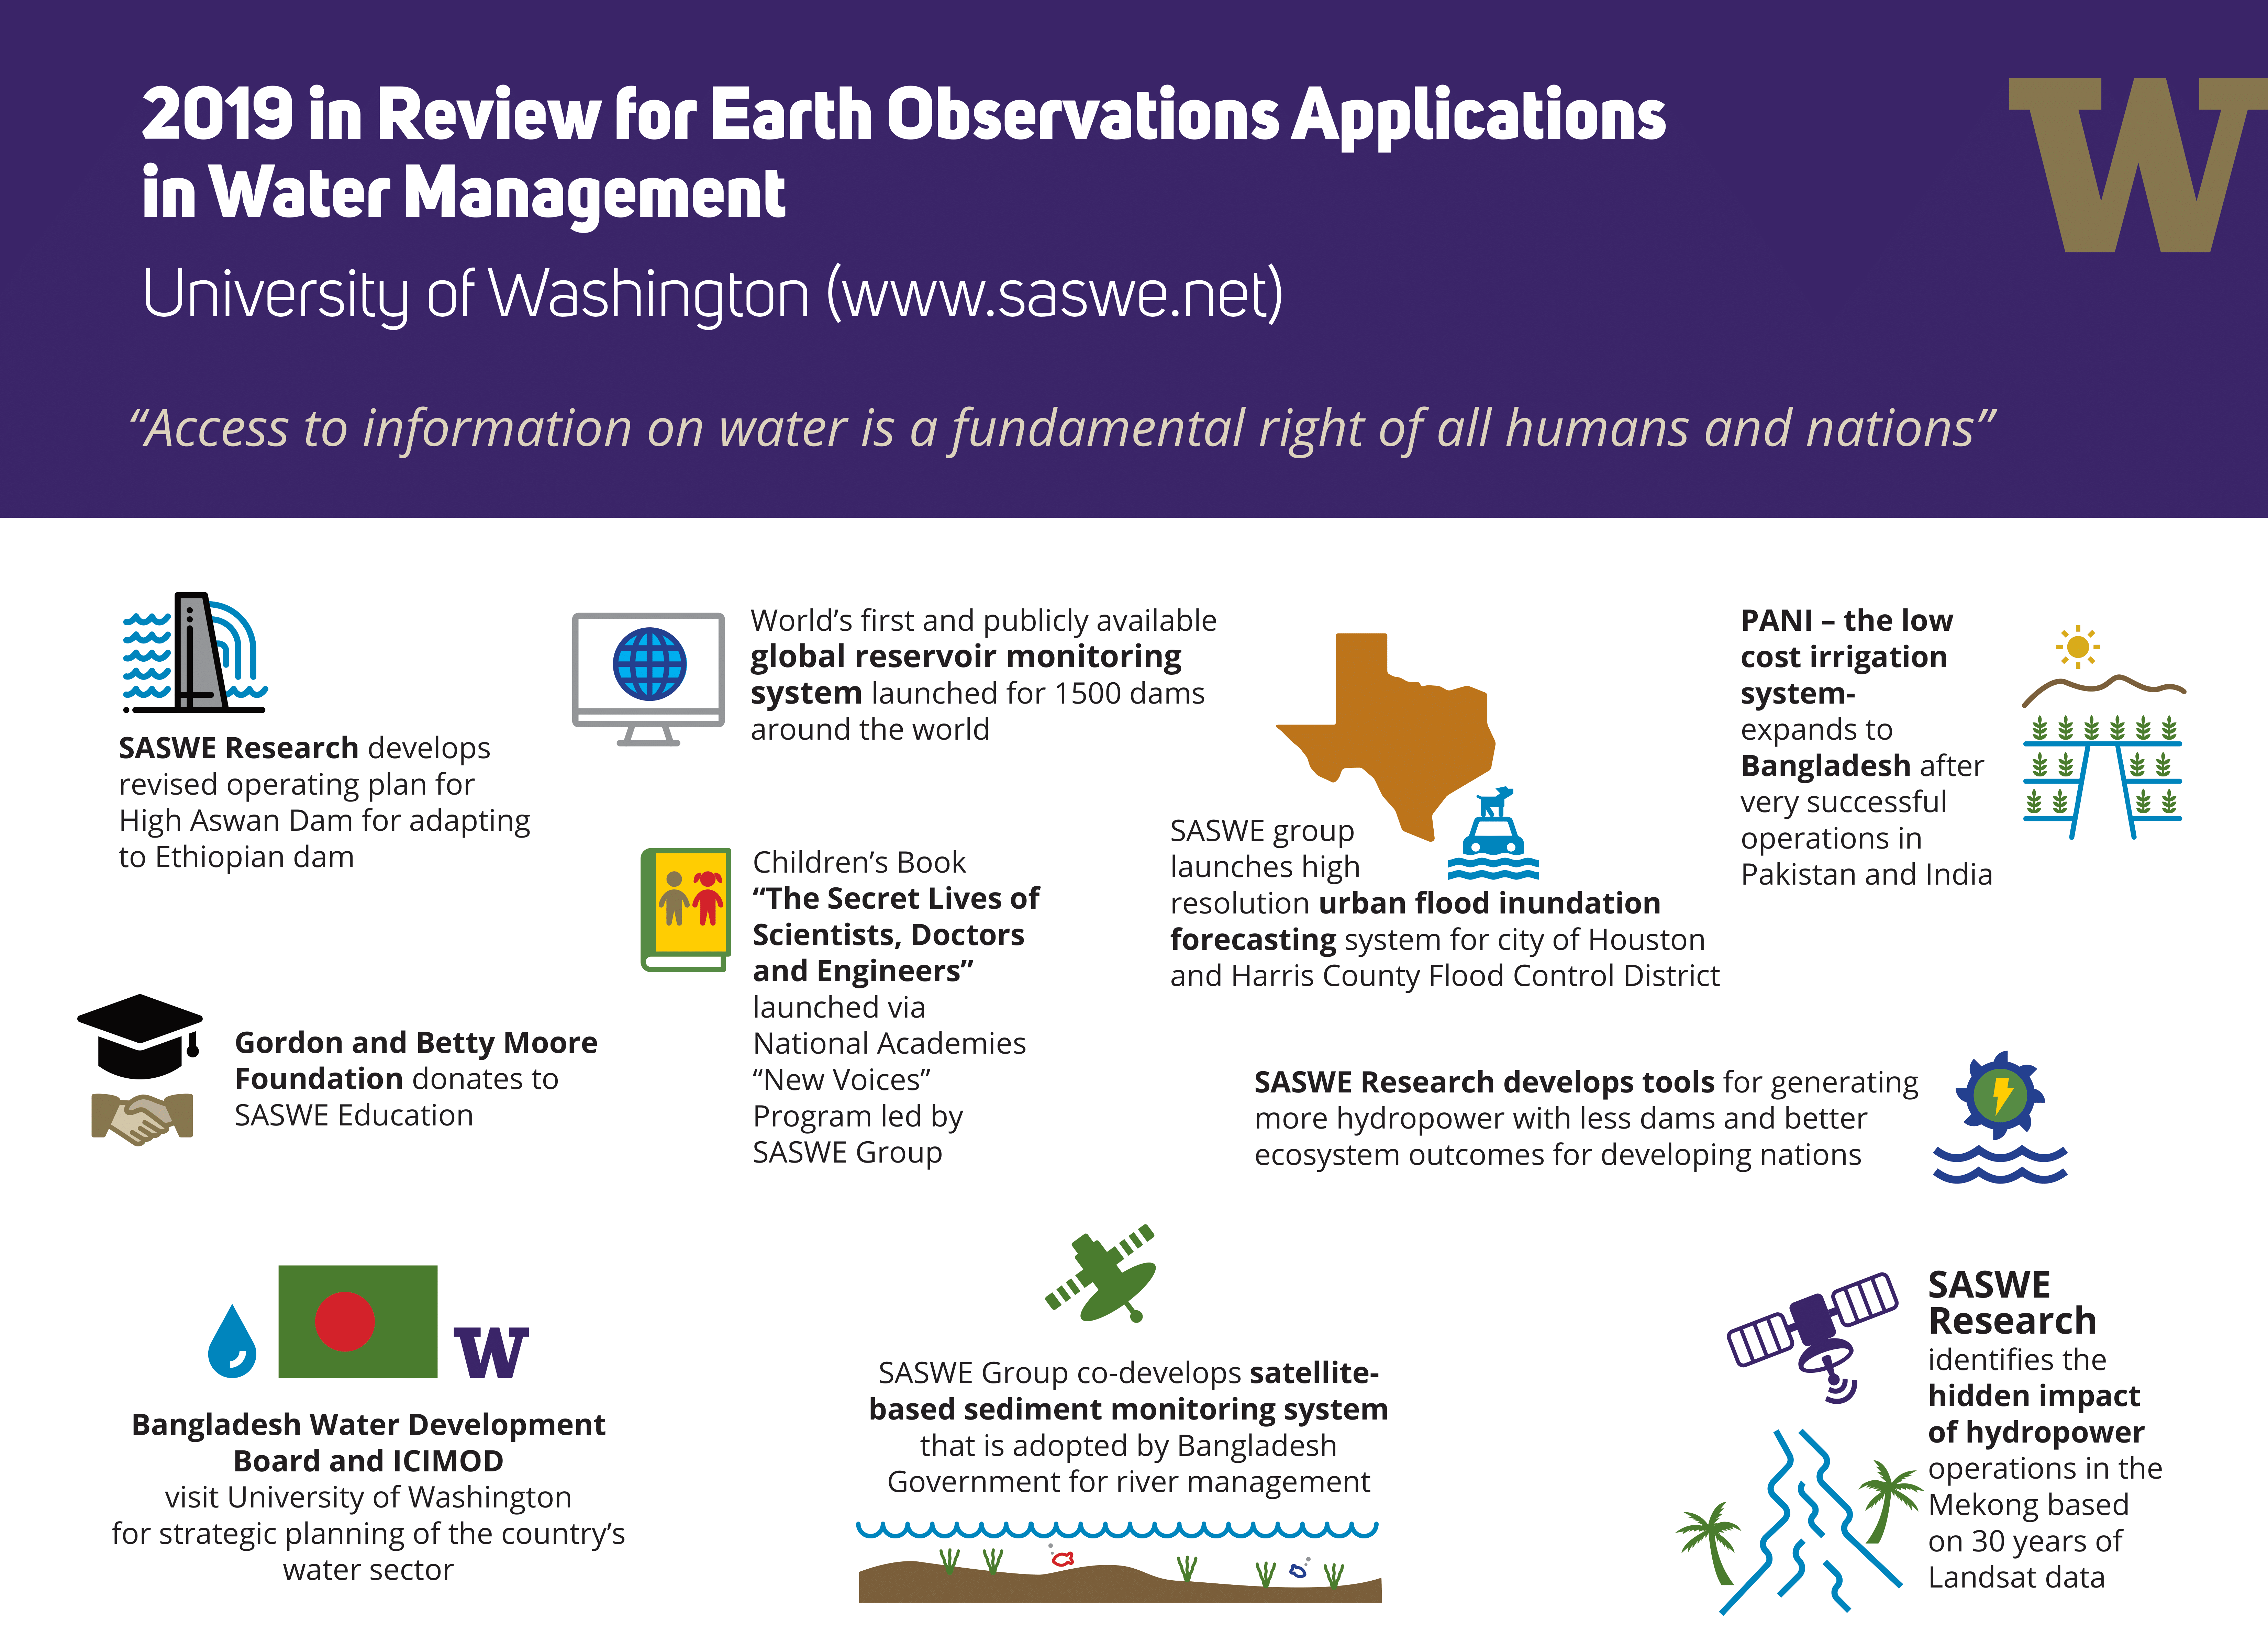 2019 In Review for EO Applications